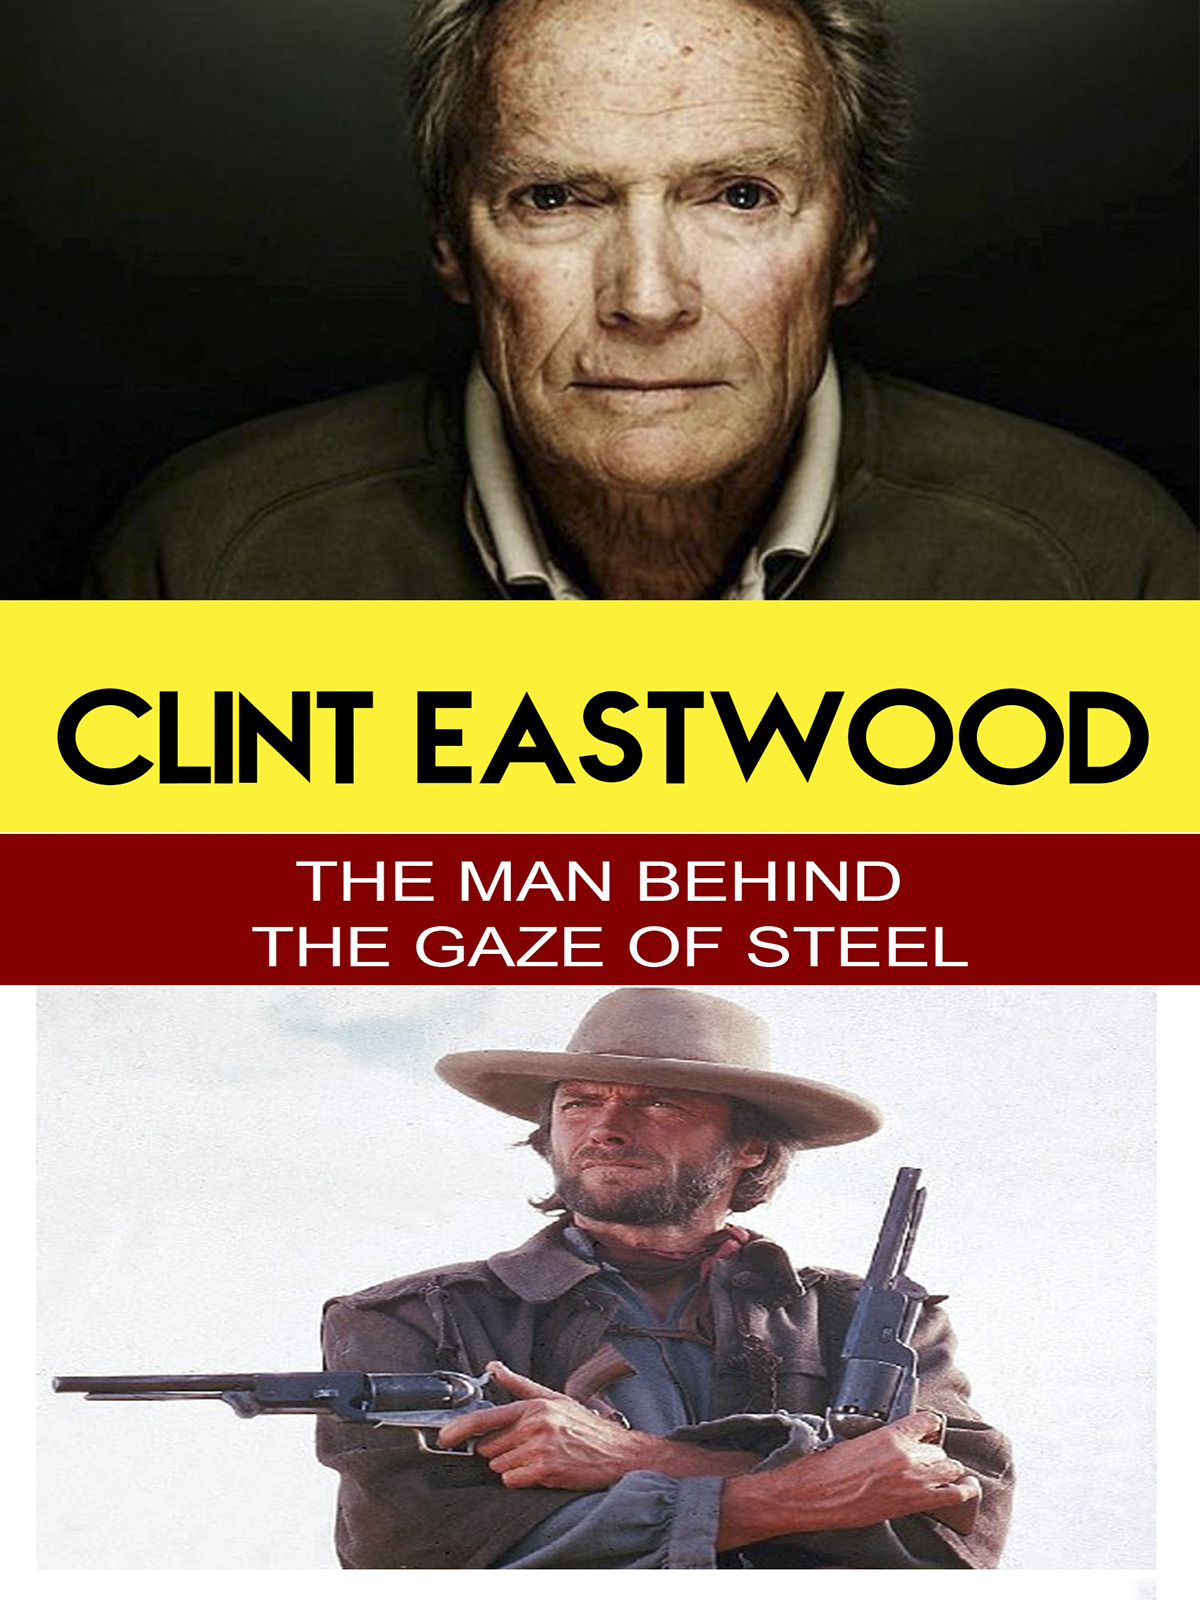 L7827 - Clint Eastwood - The Man Behind the Gaze of Steel